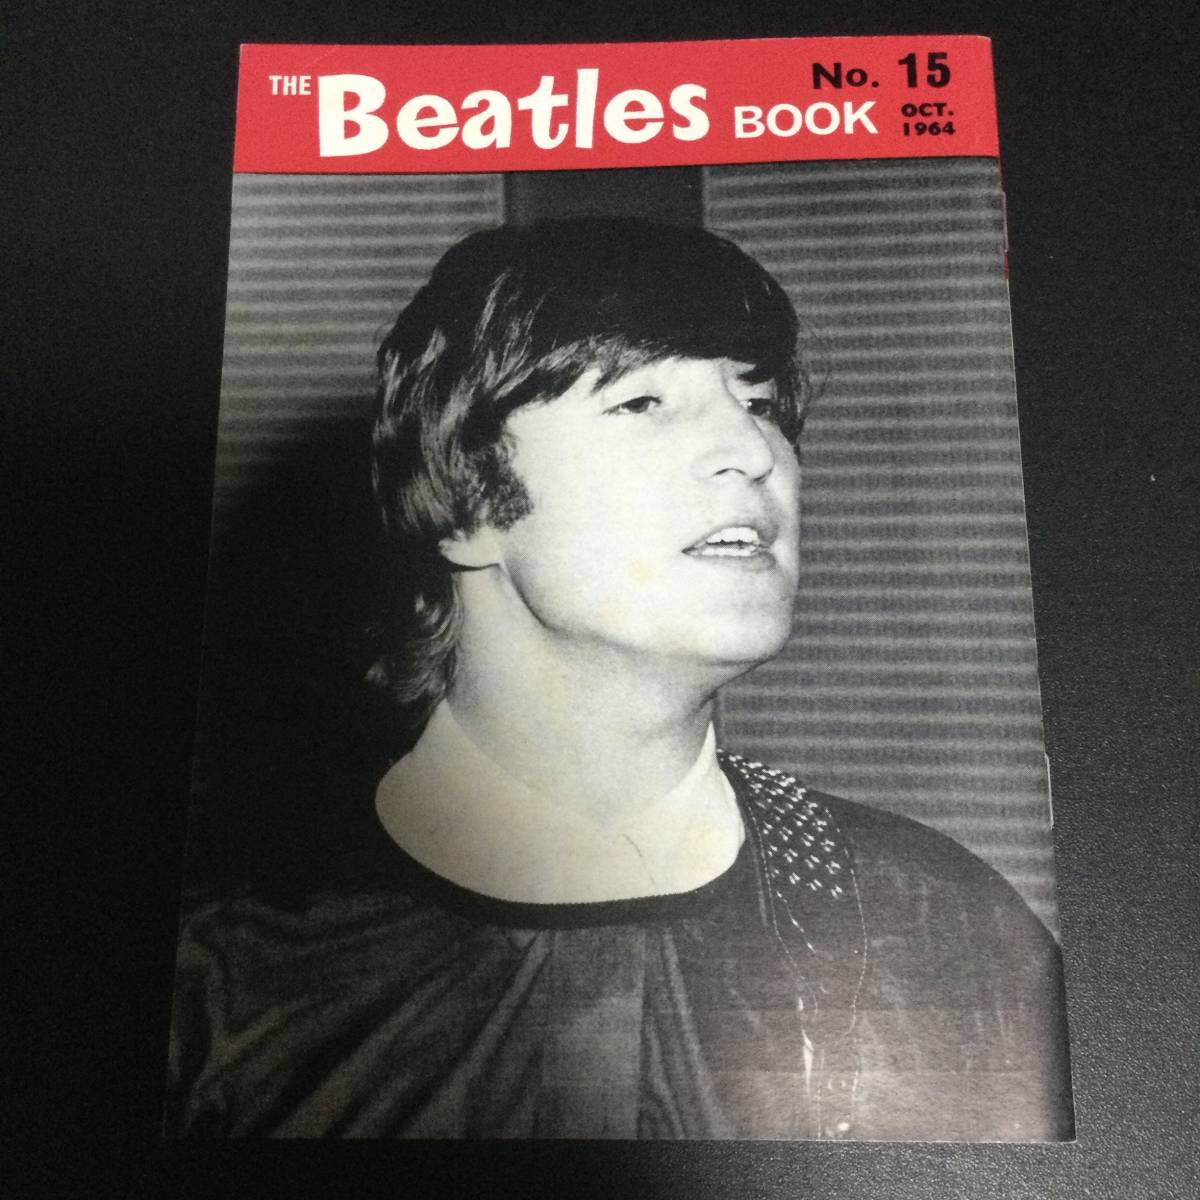 The Beatles Monthly Book No.15★1964 Oct.の画像2